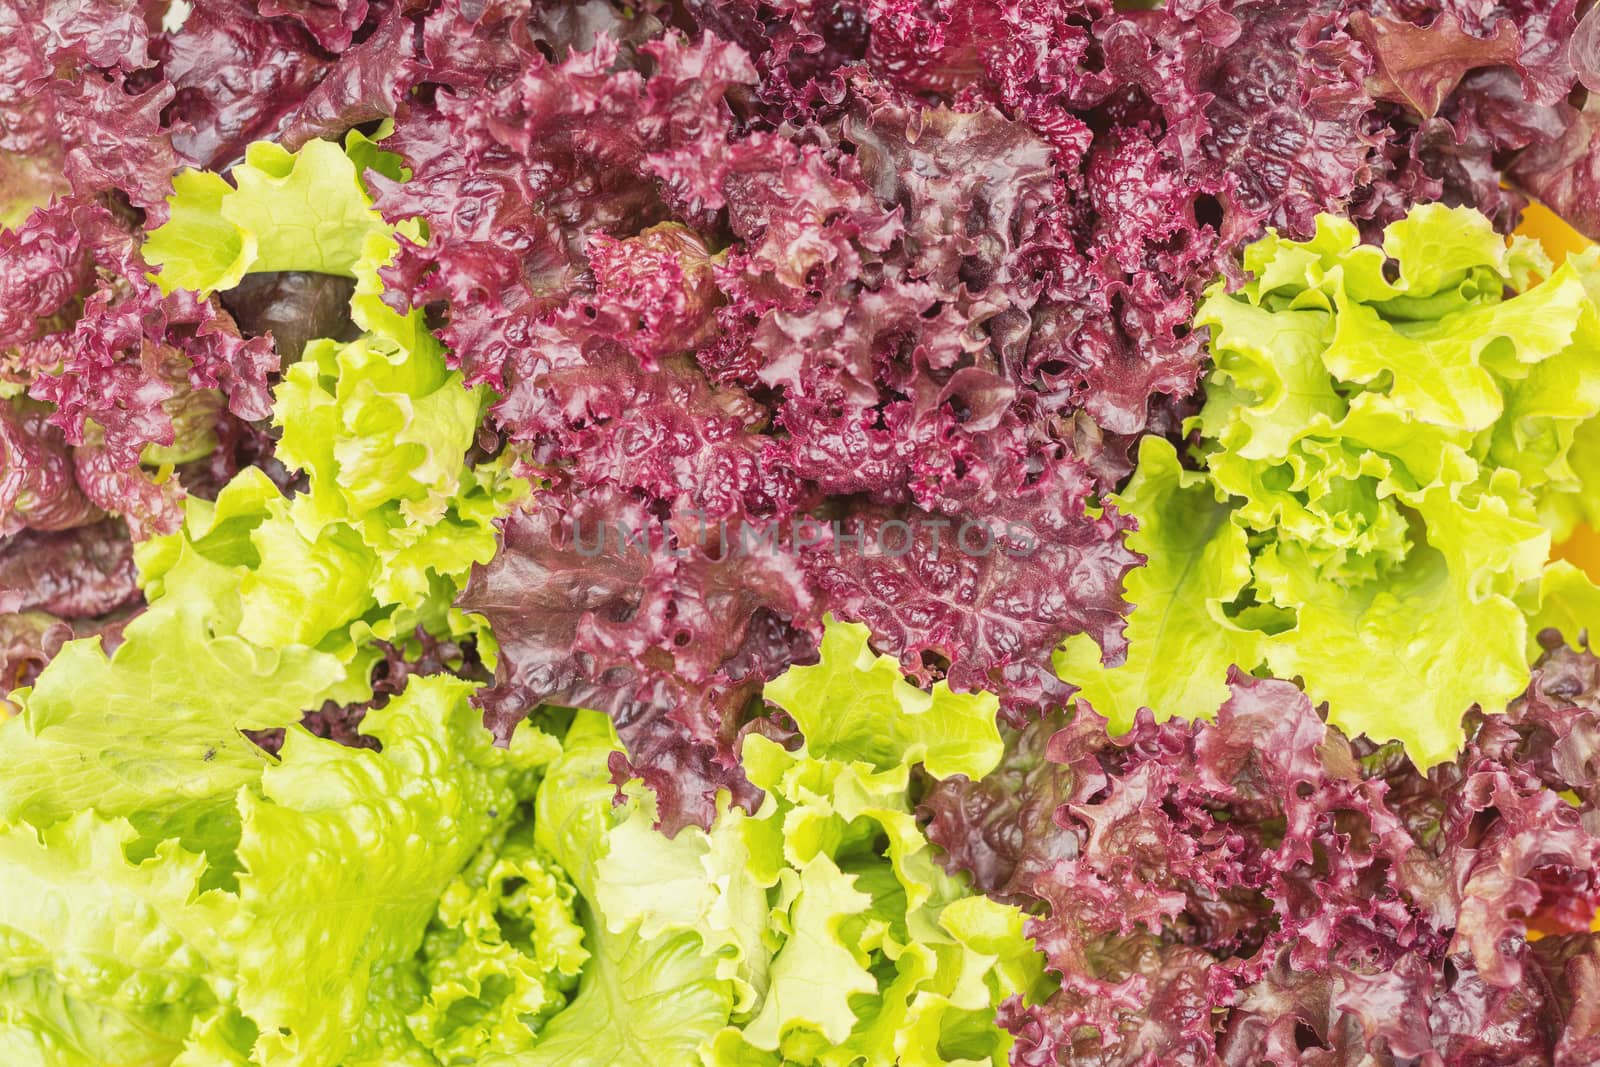 Fresh healthy leaves of Lollo Rosso or coral lettuce and Green Frisee lettuce. Close up.